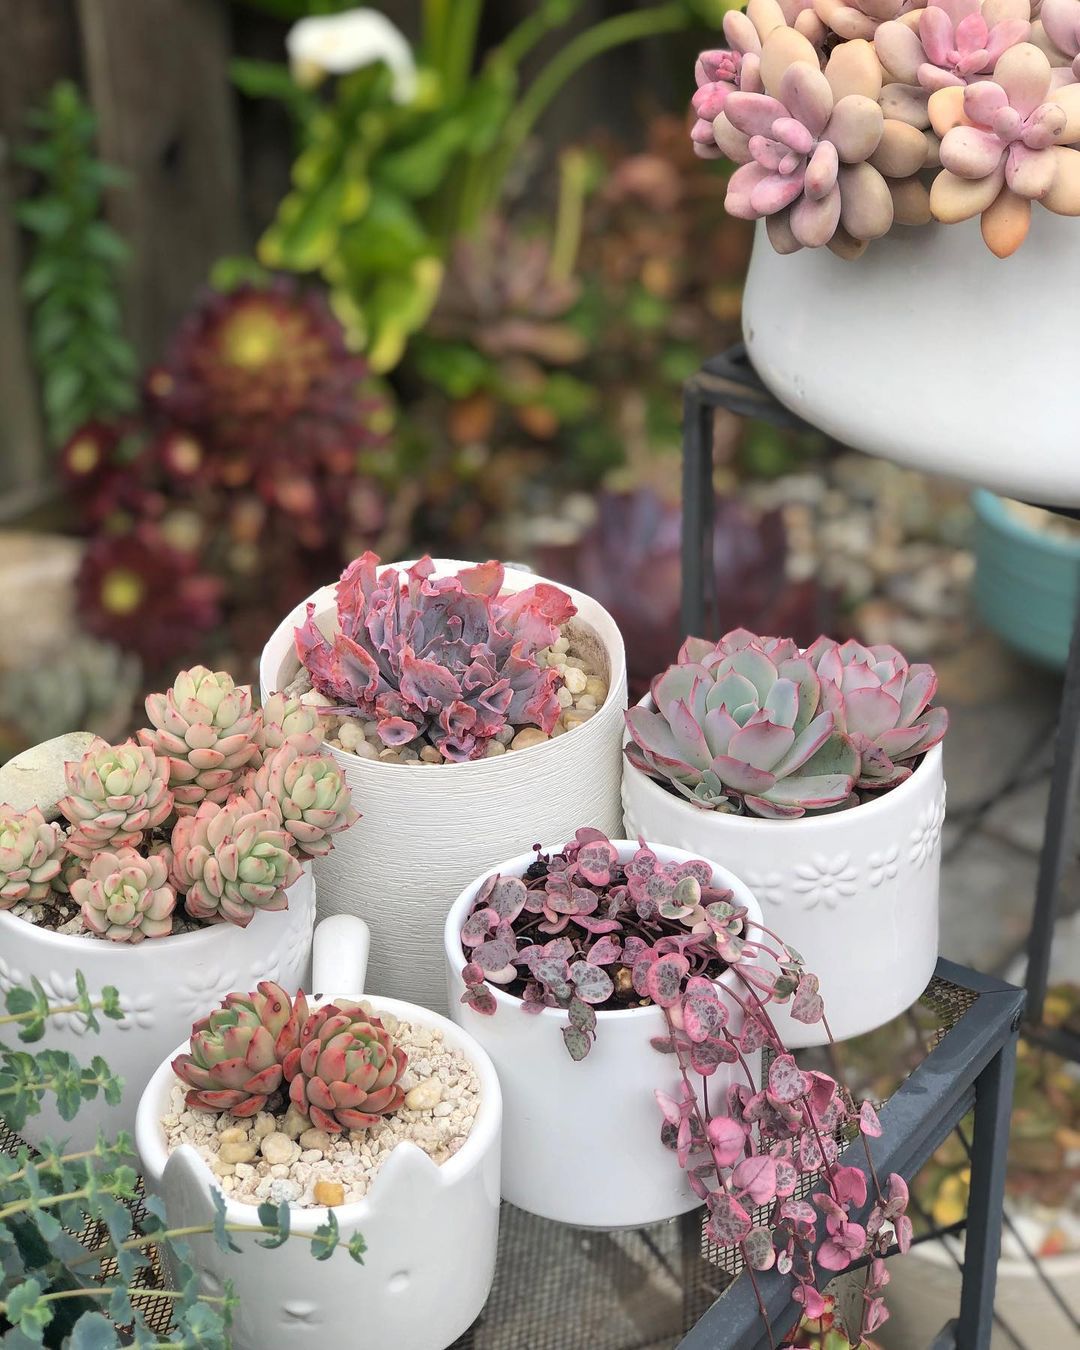 The Ultimate List Of 10 Succulents That Anyone Can Grow!